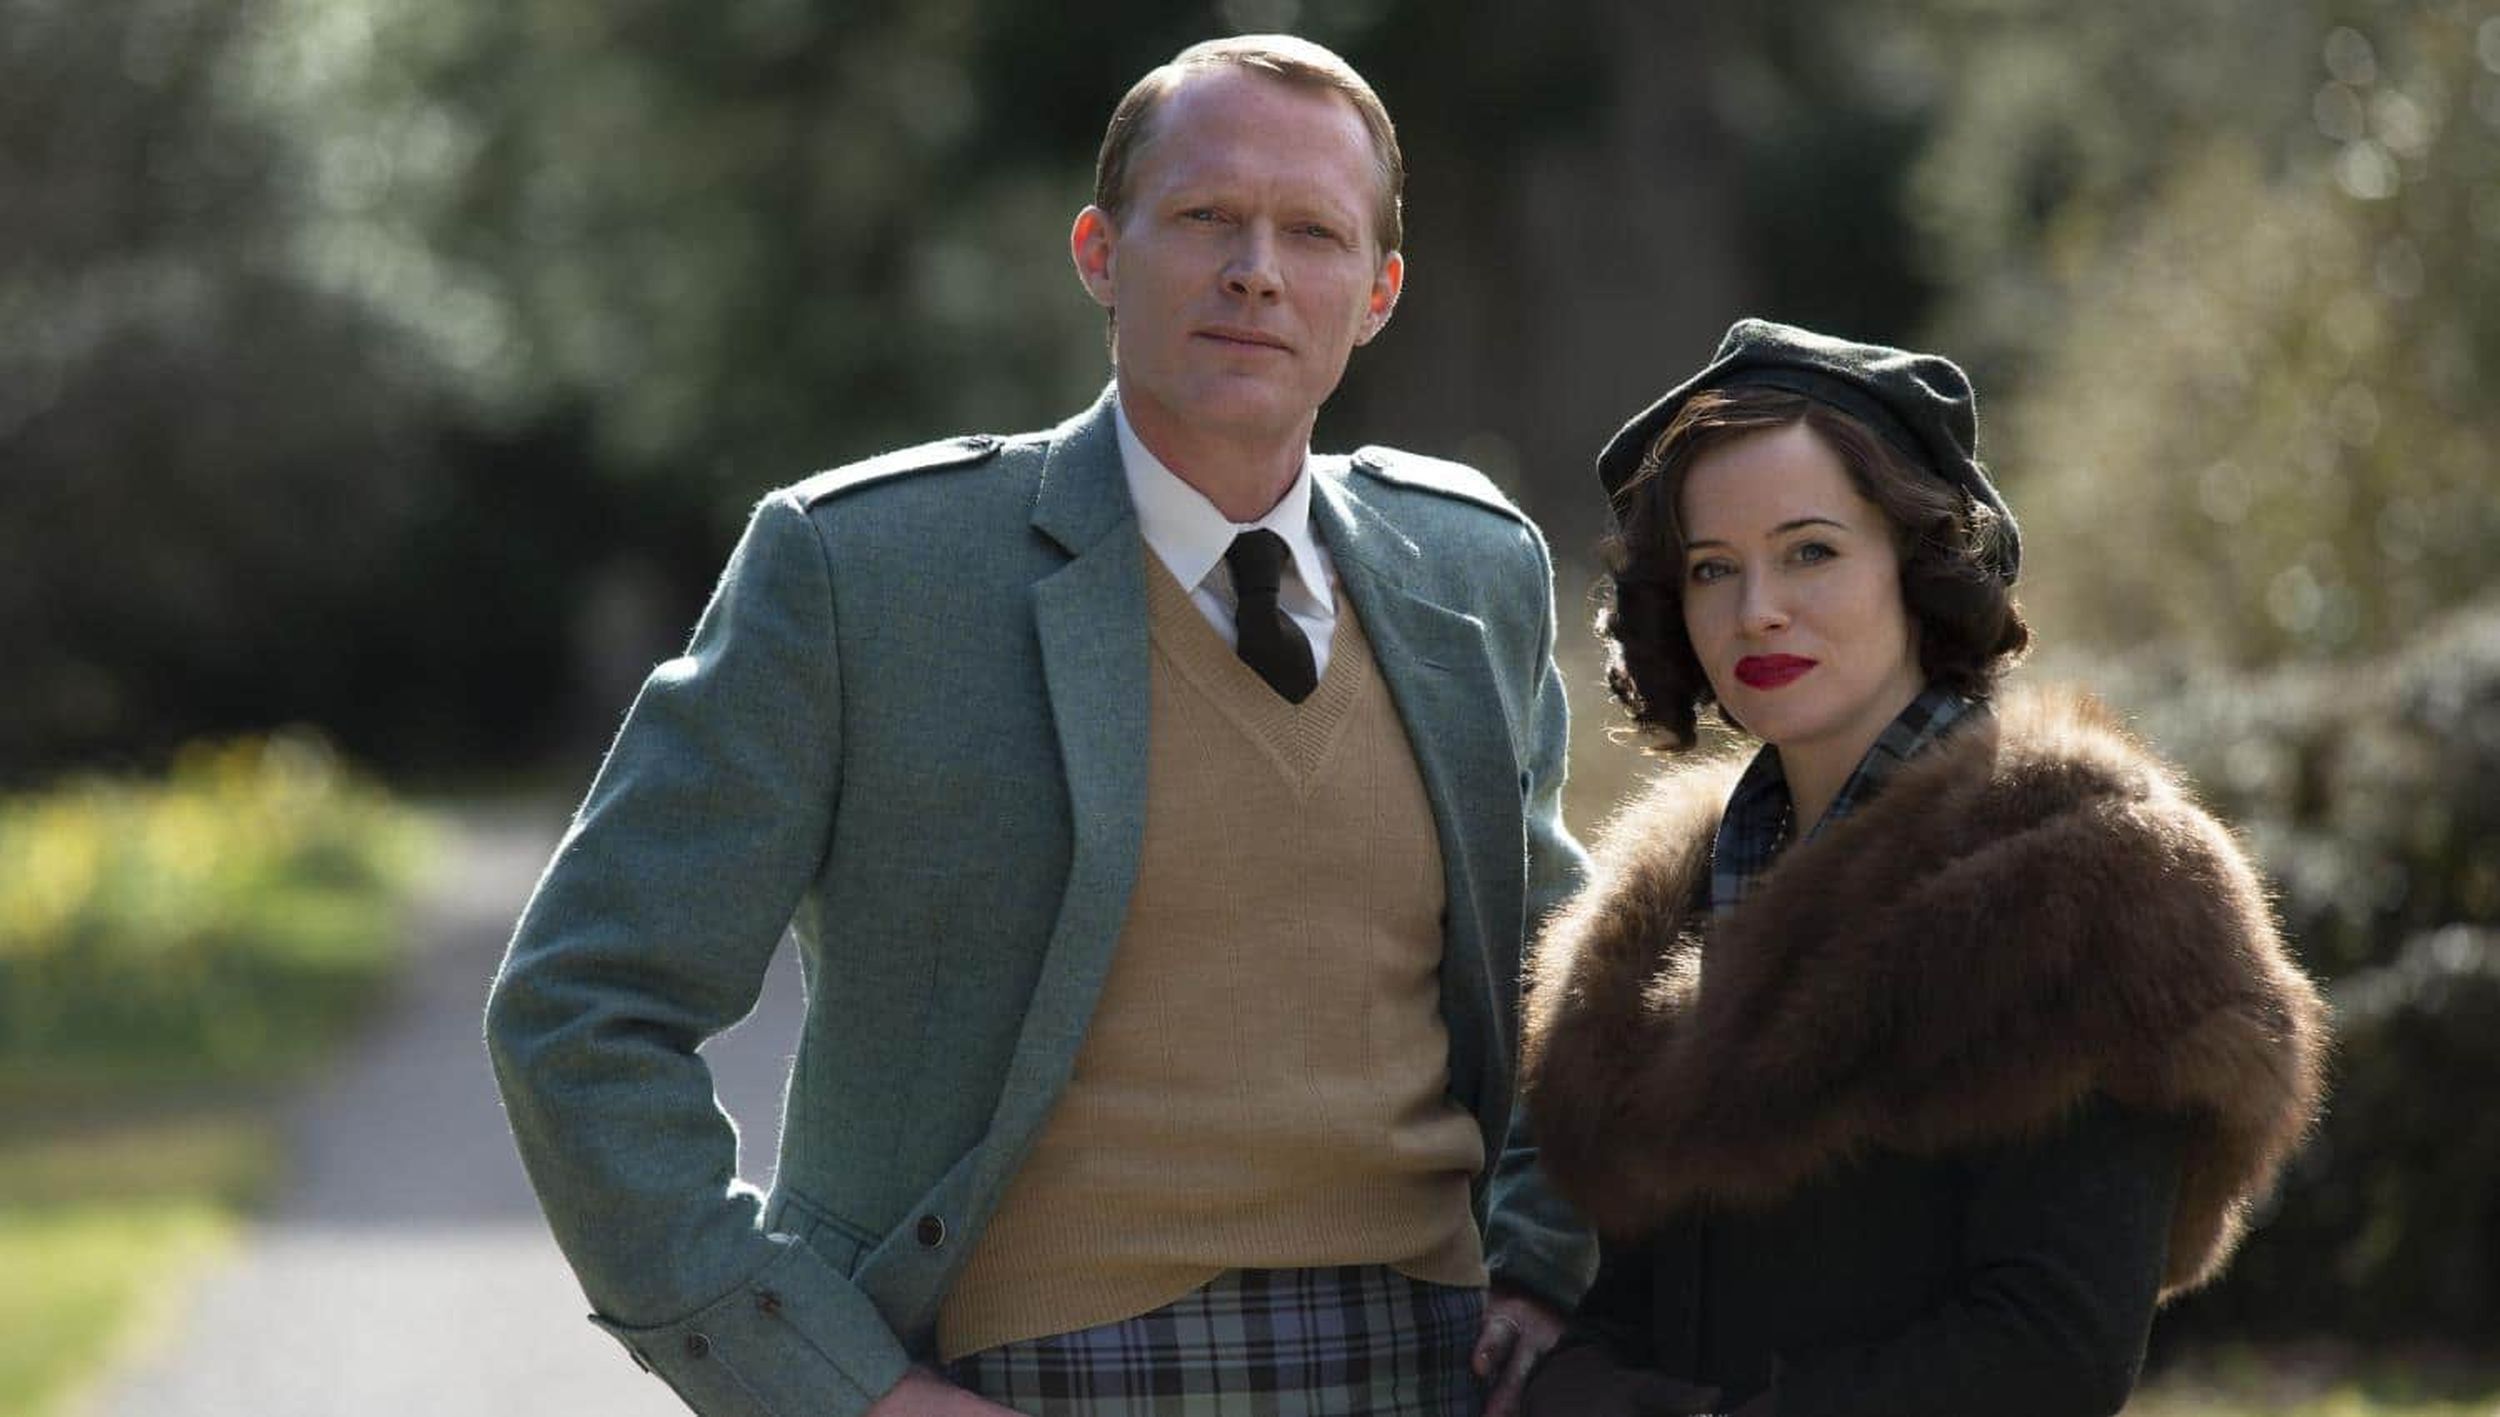 Claire Foy and Paul Bettany in A Very British Scandal